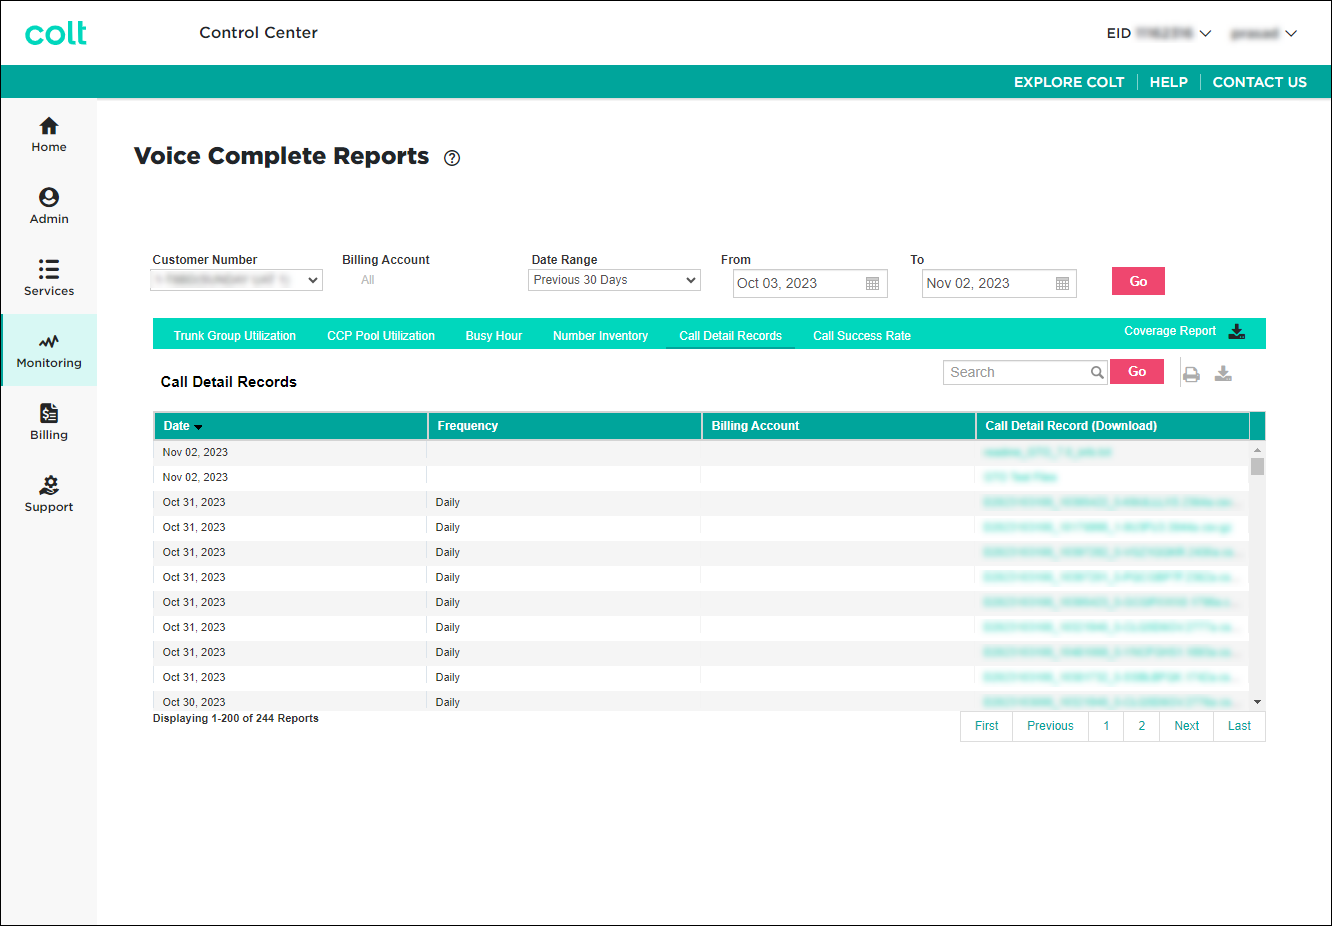 Voice Complete Reports (showing Call Detail Records)